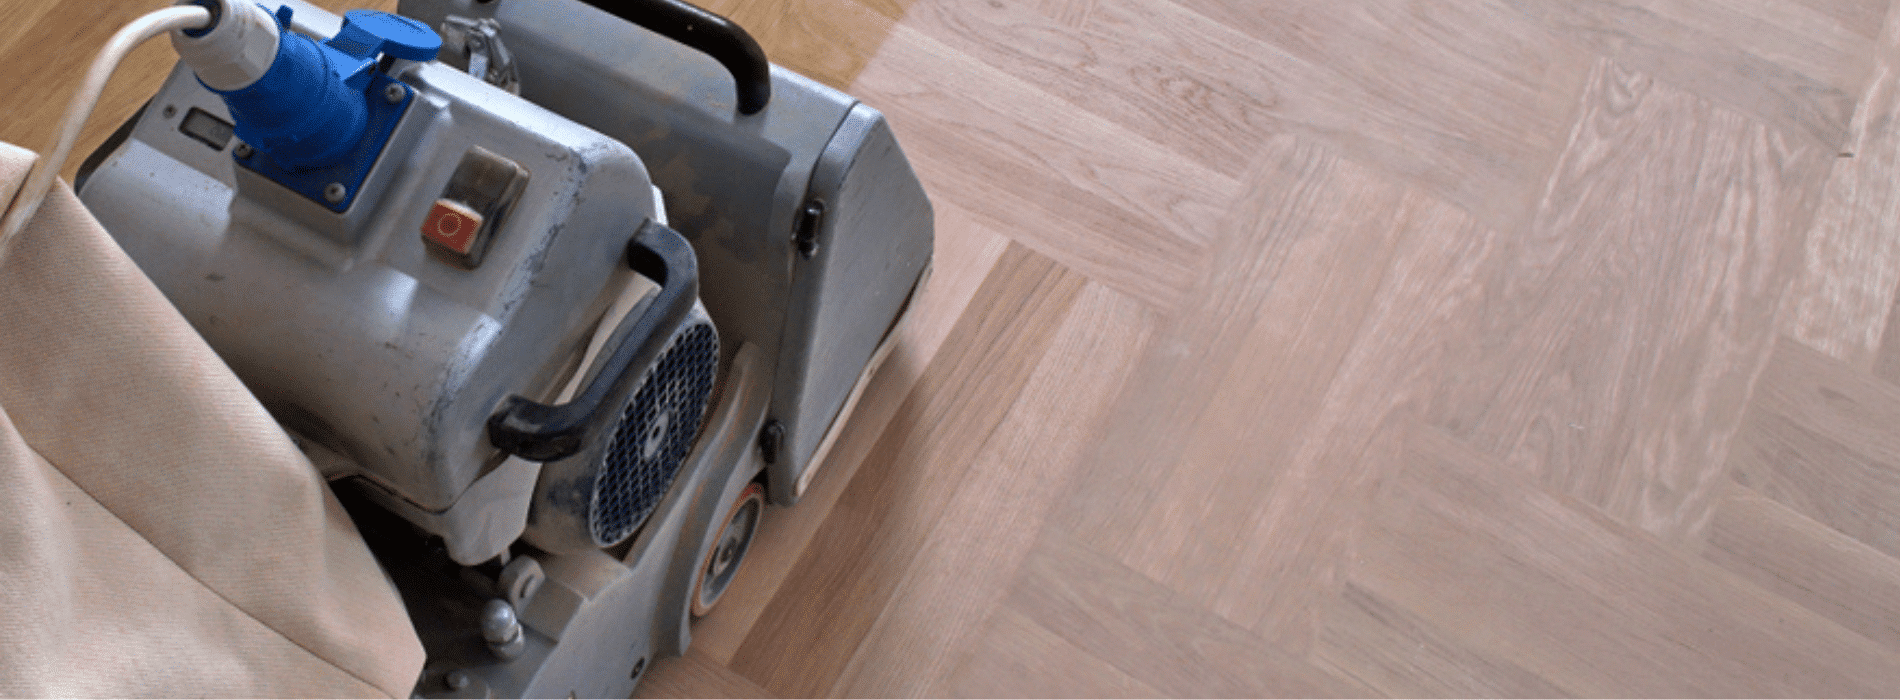 Mr Sander® in Gipsy Hill, SE19, expertly restoring herringbone flooring with Bona belt sander; HEPA-filter ensures dust-free environment, capturing the machine's precision and high-quality results.